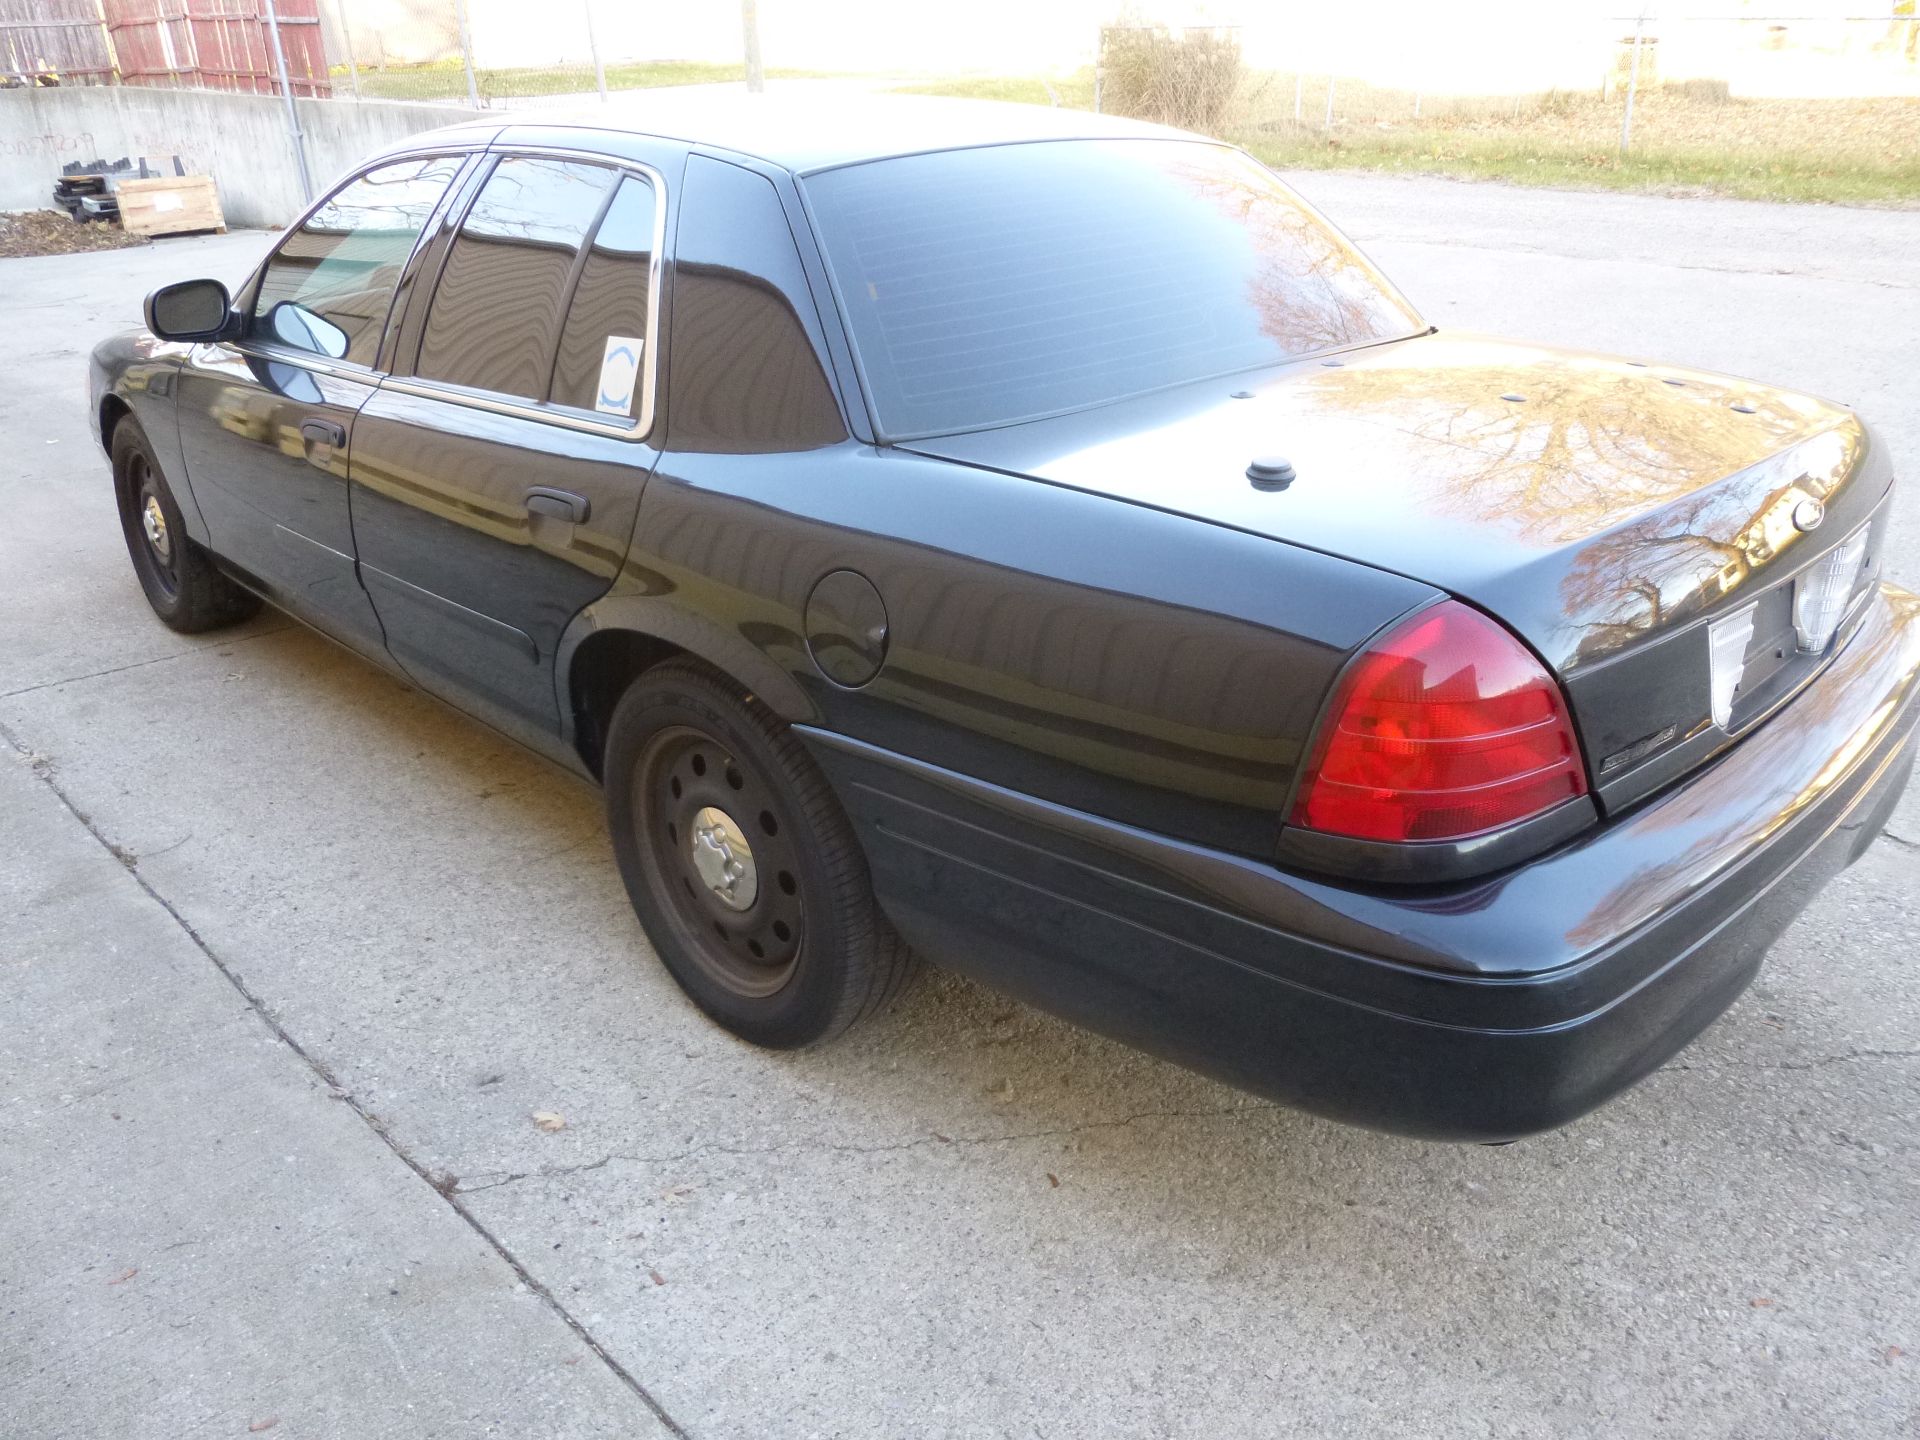 2008 Ford Crown Victoria 2FAFP71V88X176726 police interceptor 114,844 miles displayed Municipally - Image 5 of 13